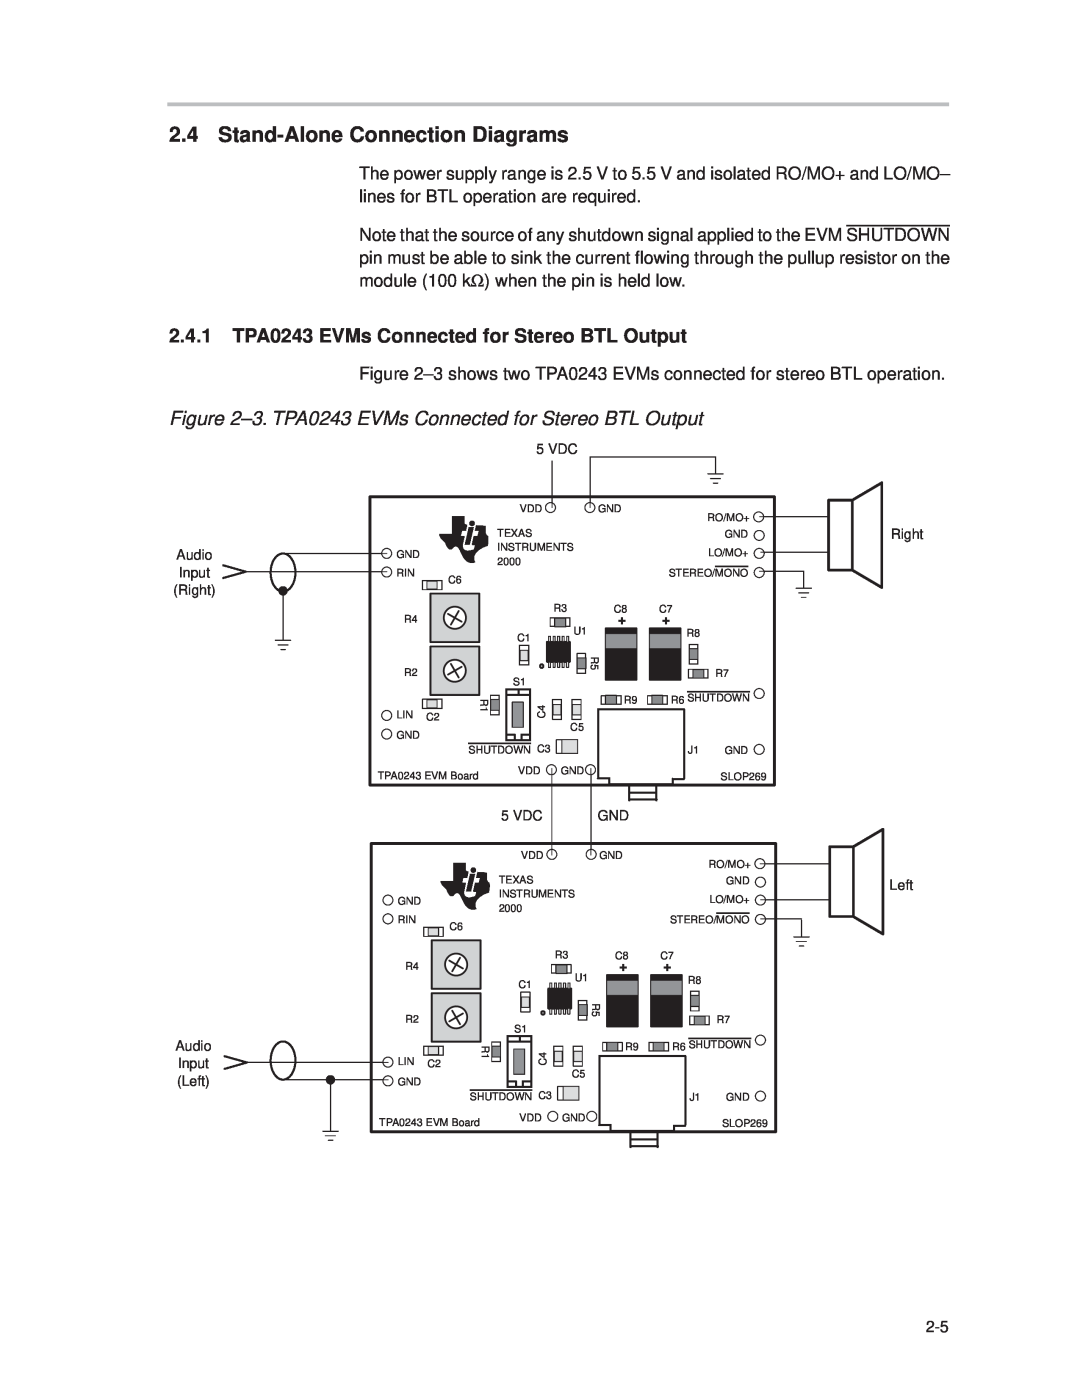 Texas Instruments manual Stand-AloneConnection Diagrams, 2.4.1TPA0243 EVMs Connected for Stereo BTL Output 